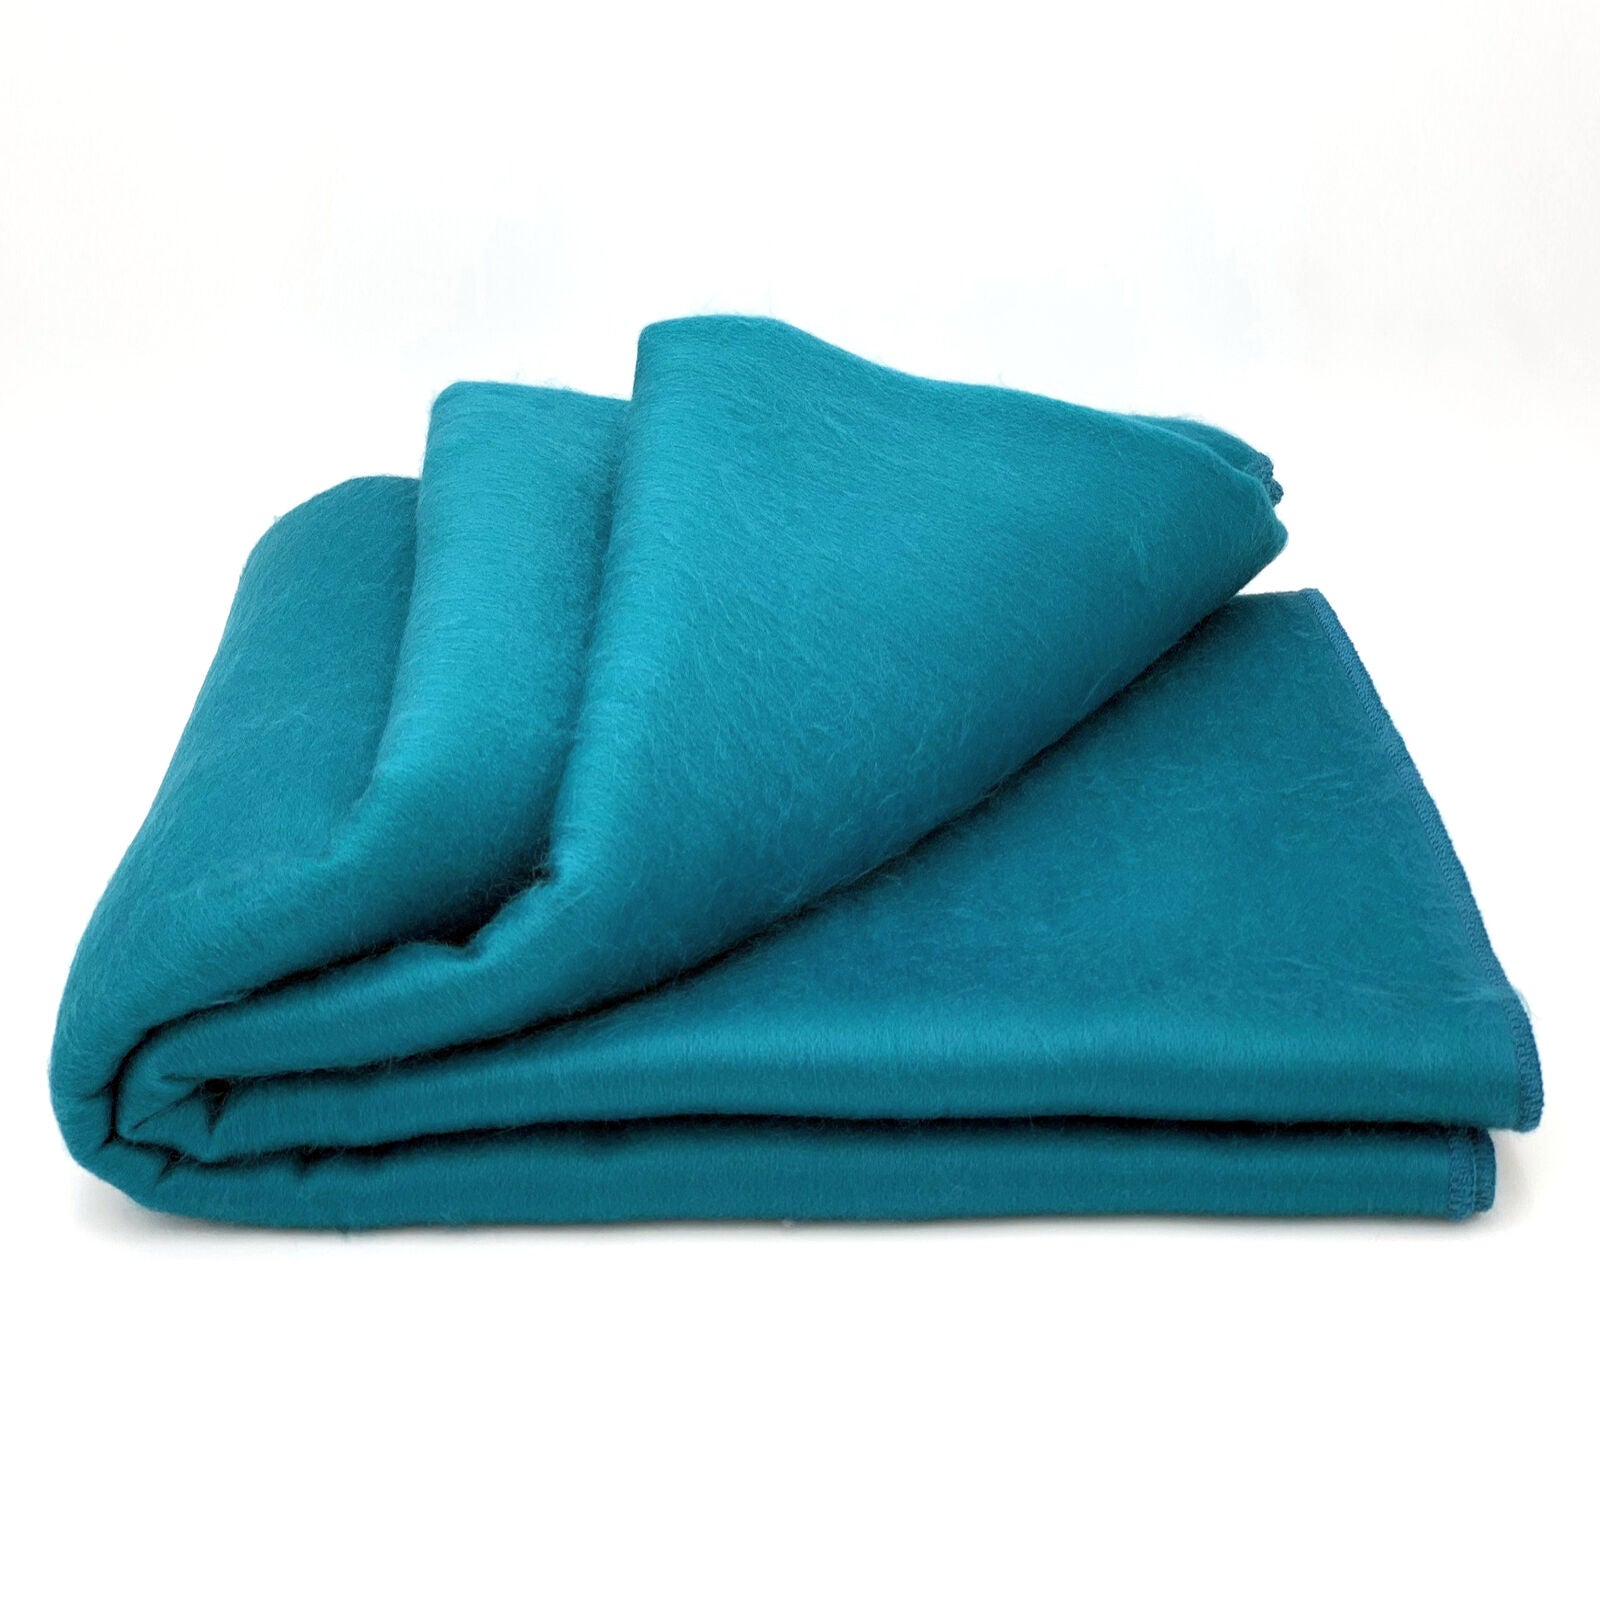 Moyaschucho - Baby Alpaca Wool Throw Blanket / Sofa Cover - Queen 90" x 65" - solid pattern teal/turquoise/blue/cyan